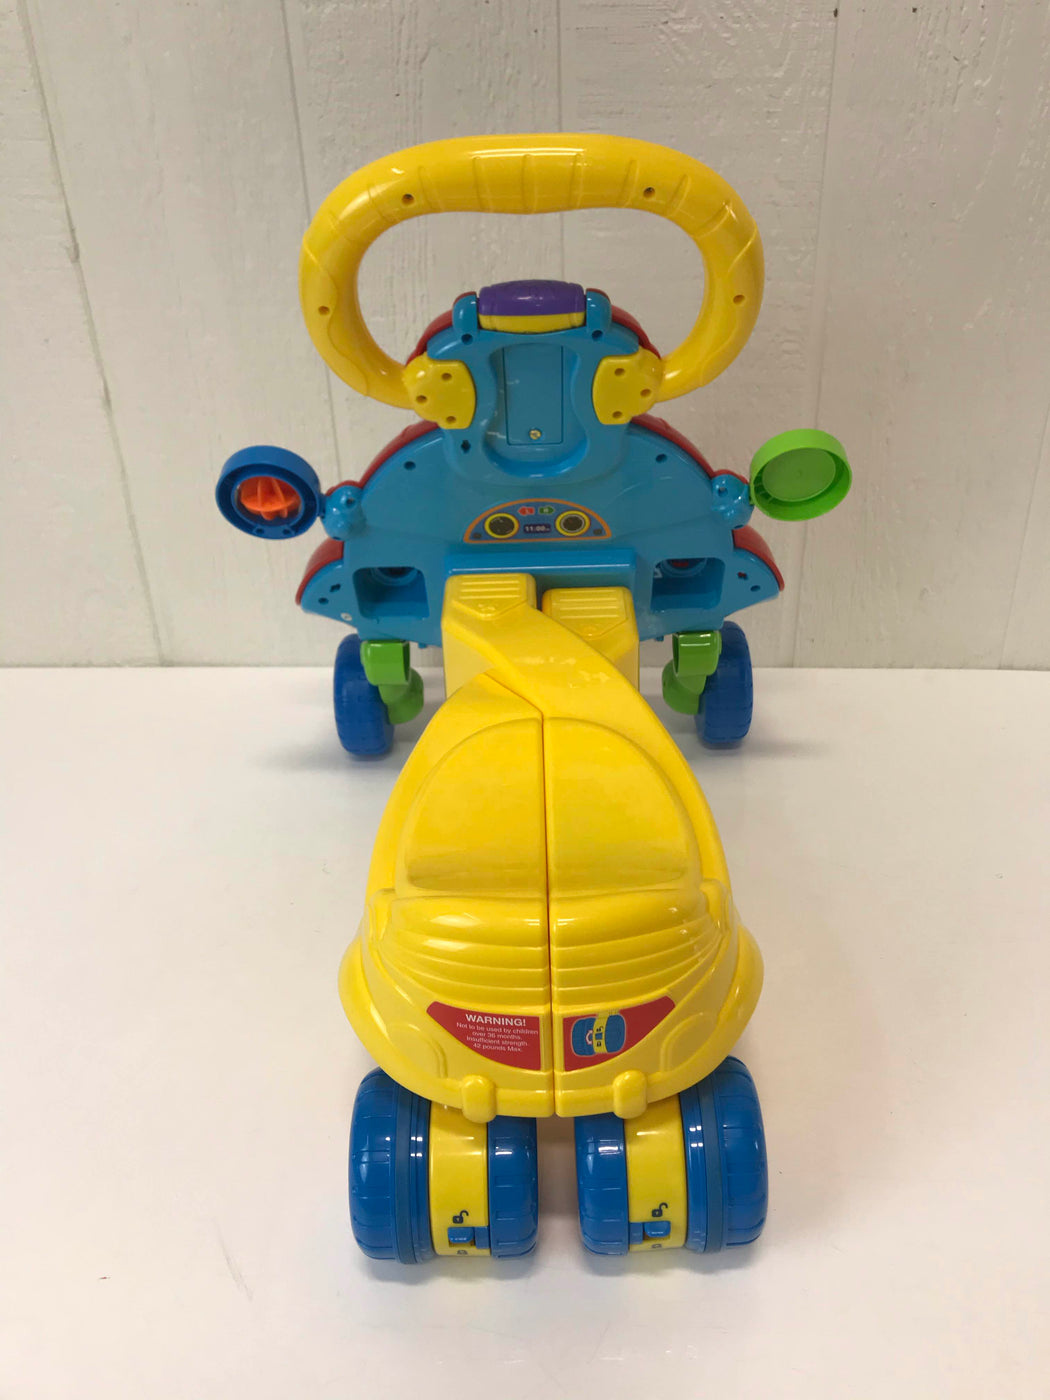 sit stand and ride baby walker